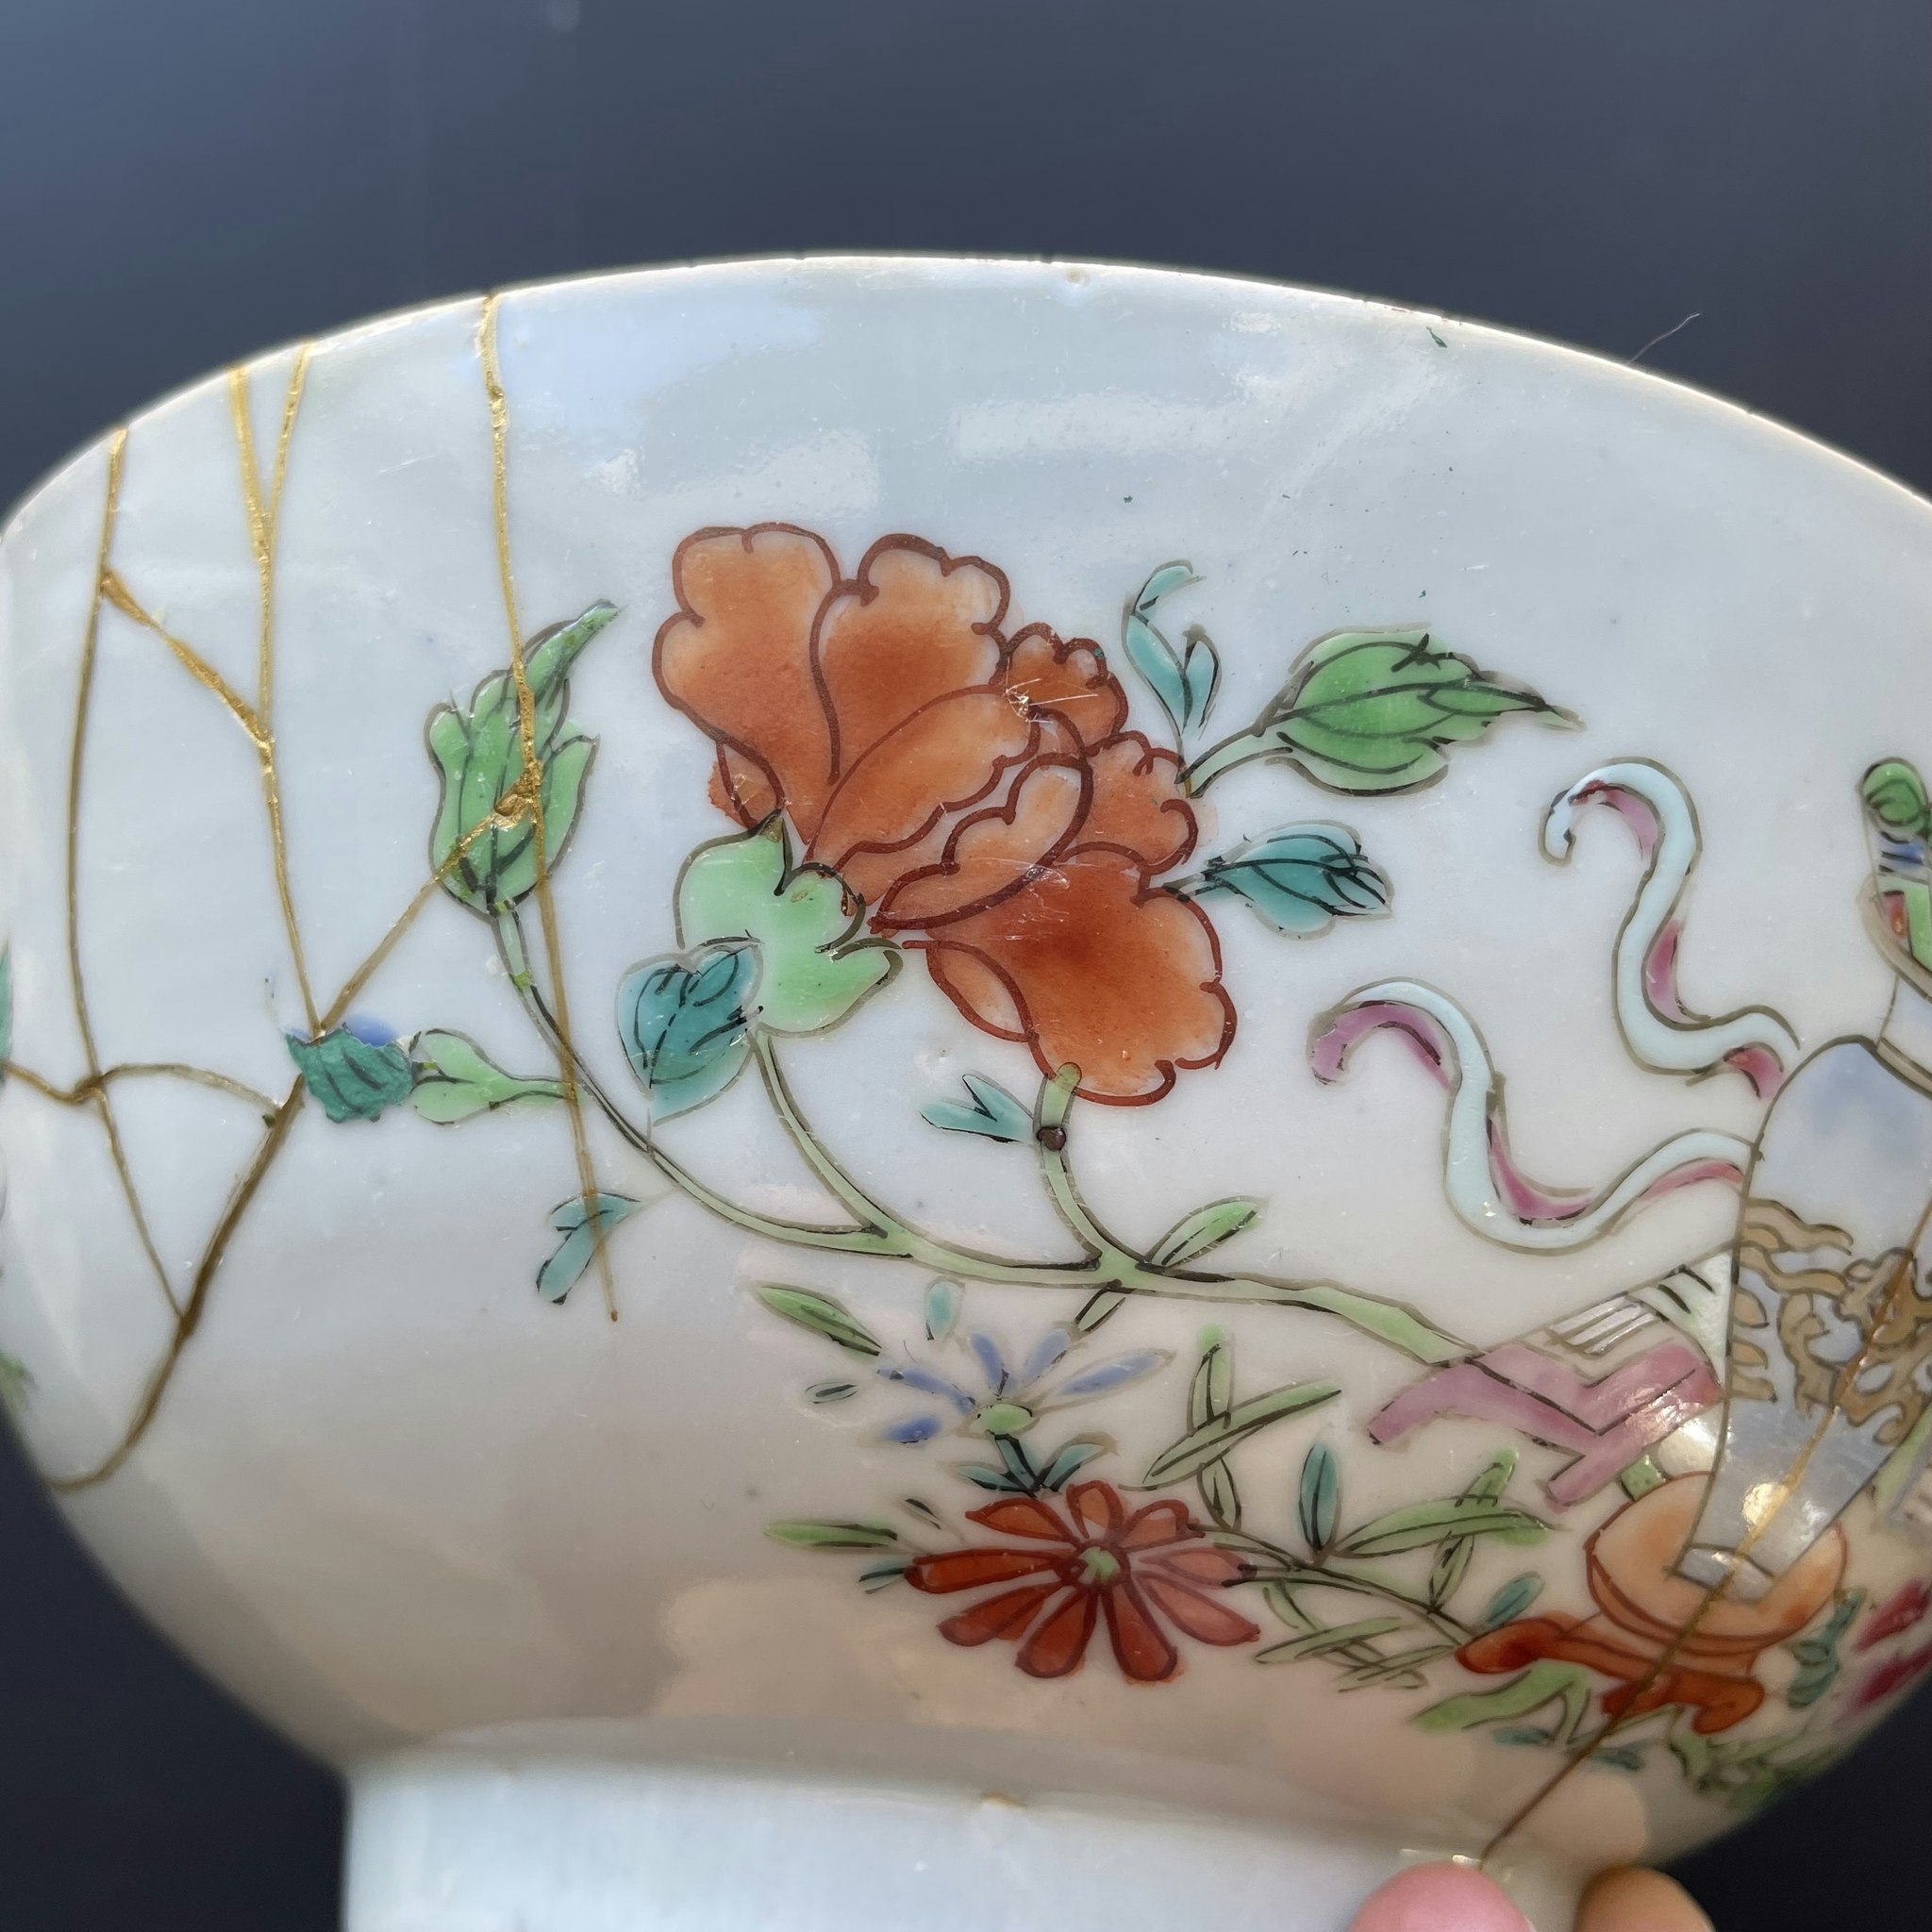 Antique Chinese famille rose bowl 18th century #1380